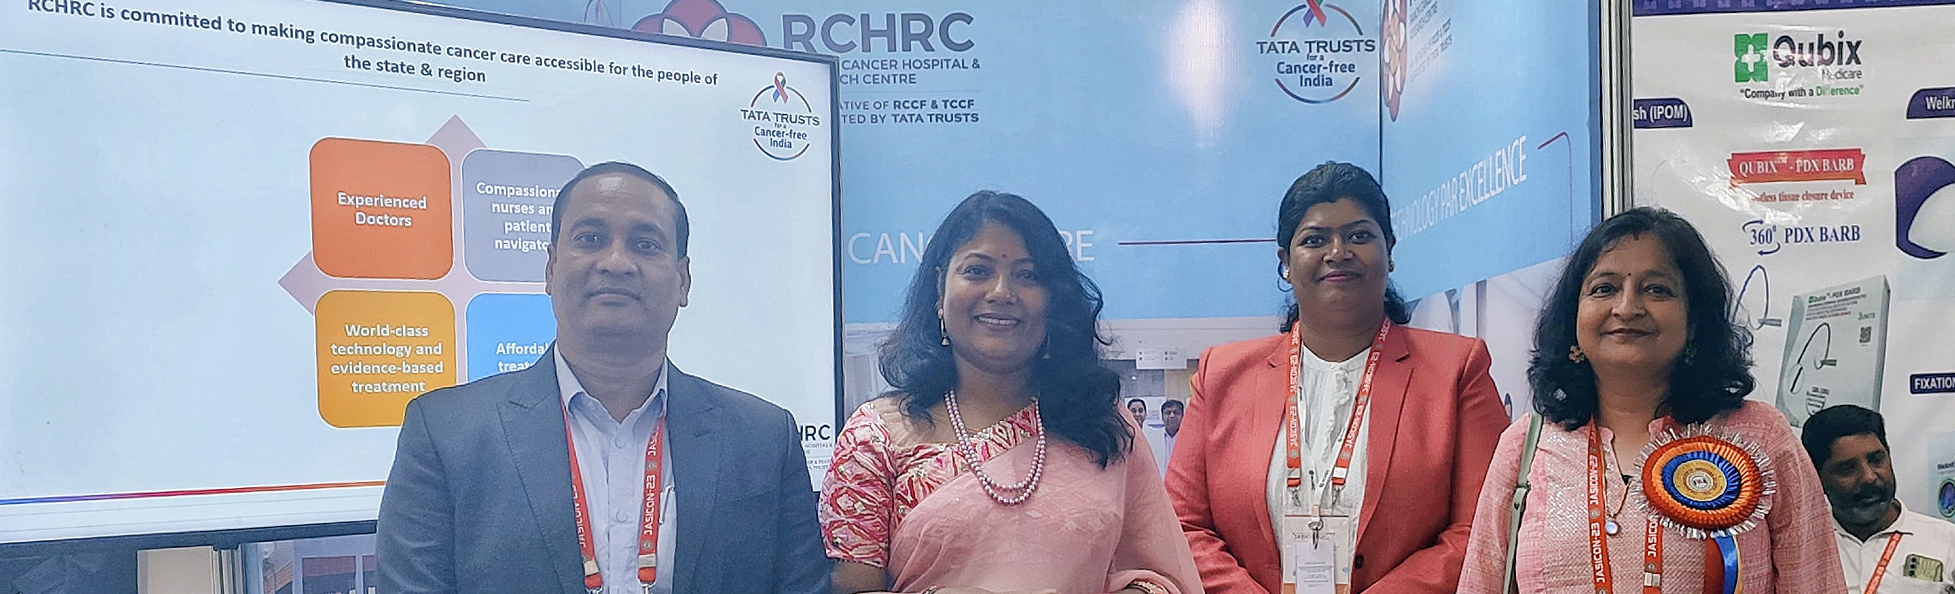 RCHRC excels at JASICON 23, spotlighting advanced cancer care and surgical expertise